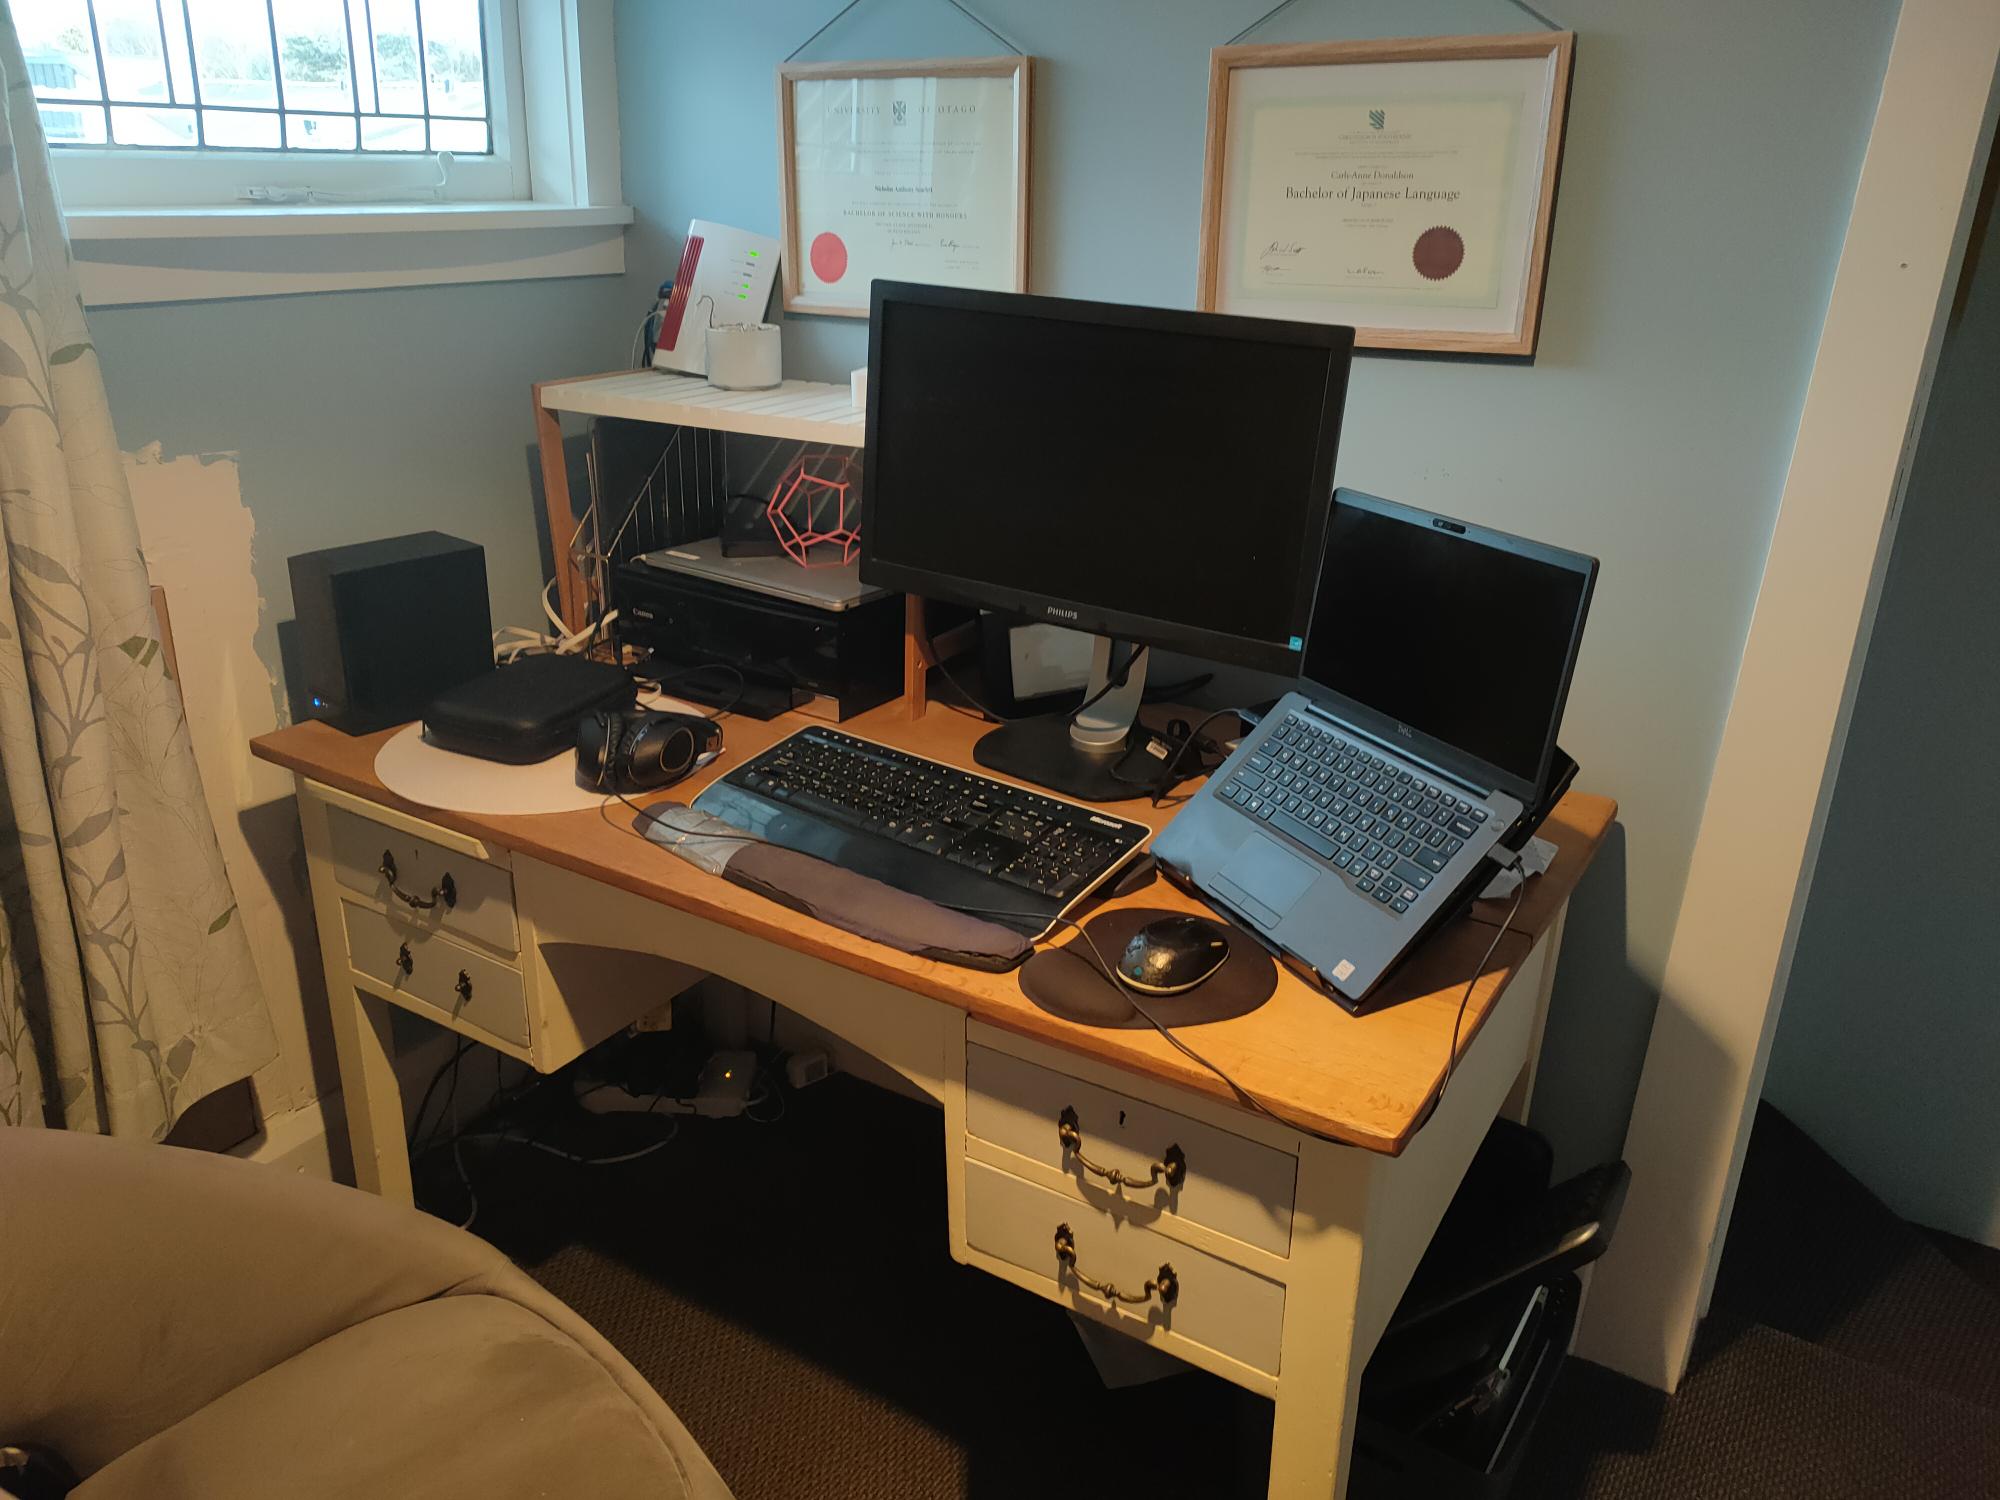 A desk with a computer and a computer on it

Description automatically generated with low confidence